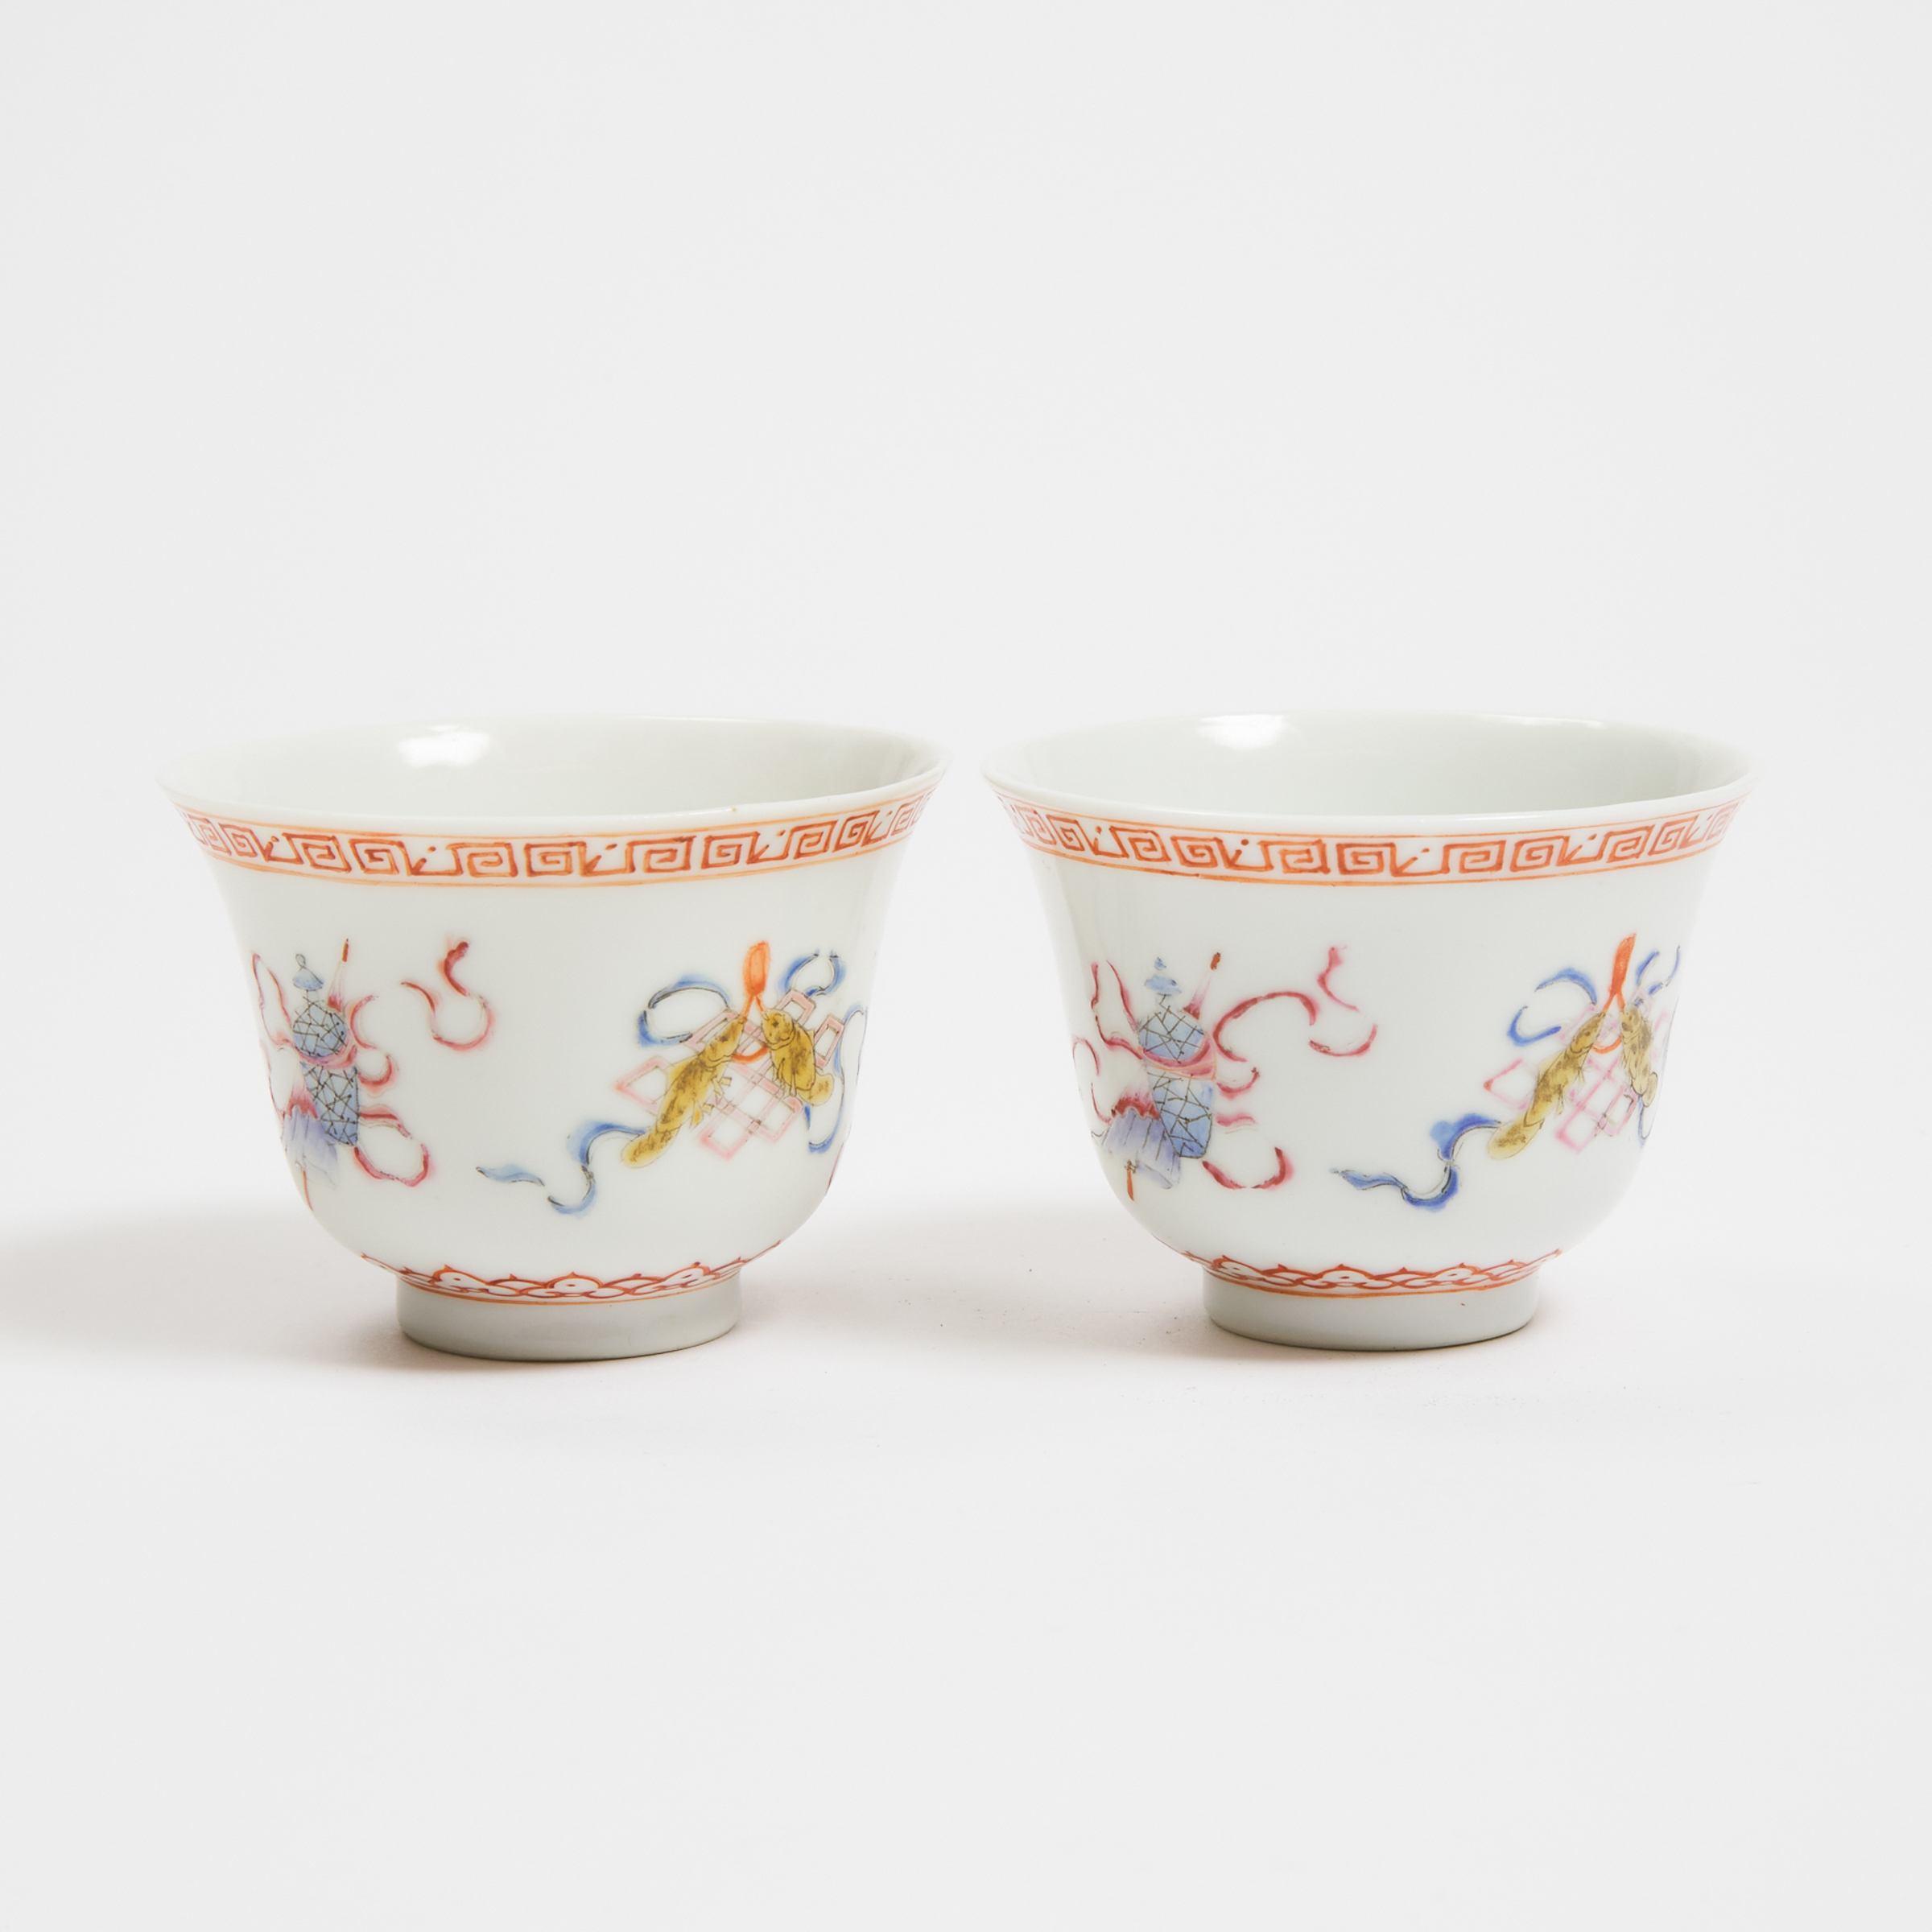 A Pair of Famille Rose 'Buddhist Emblems' Wine Cups, Qianlong Mark, Late Qing Dynasty